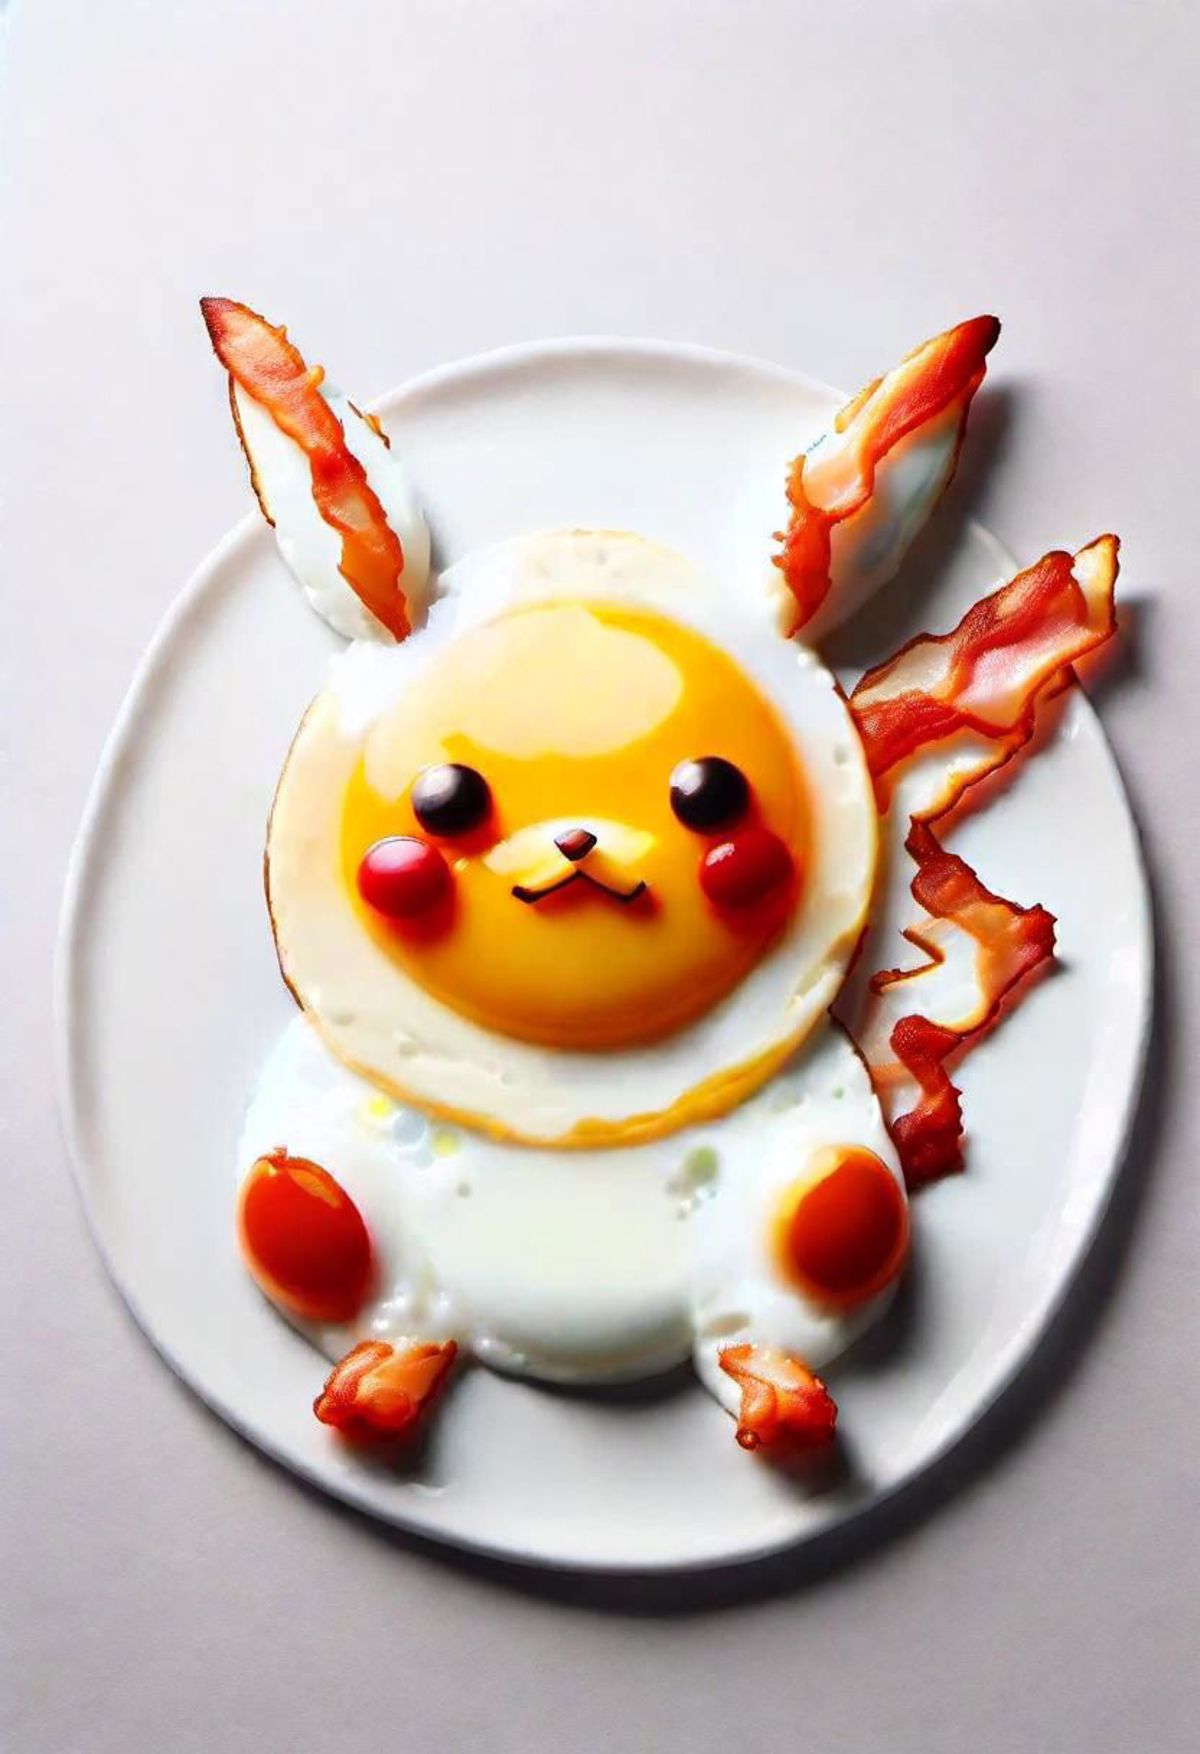 A creative breakfast plate with a Pokemon character made from eggs and bacon.